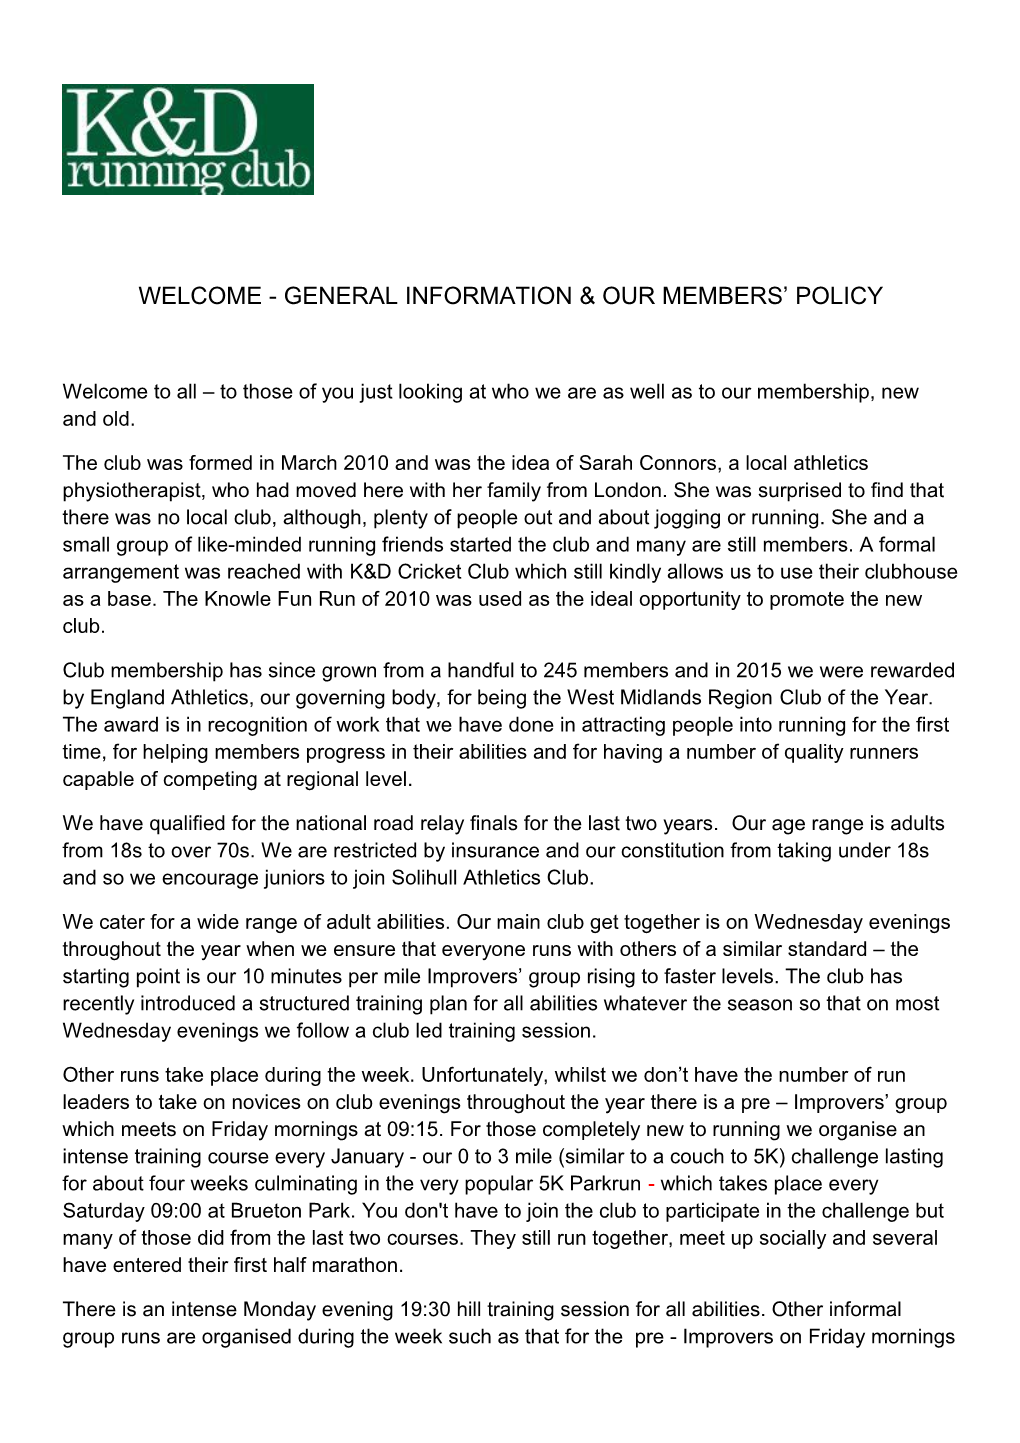 Welcome -General Informationour Members Policy